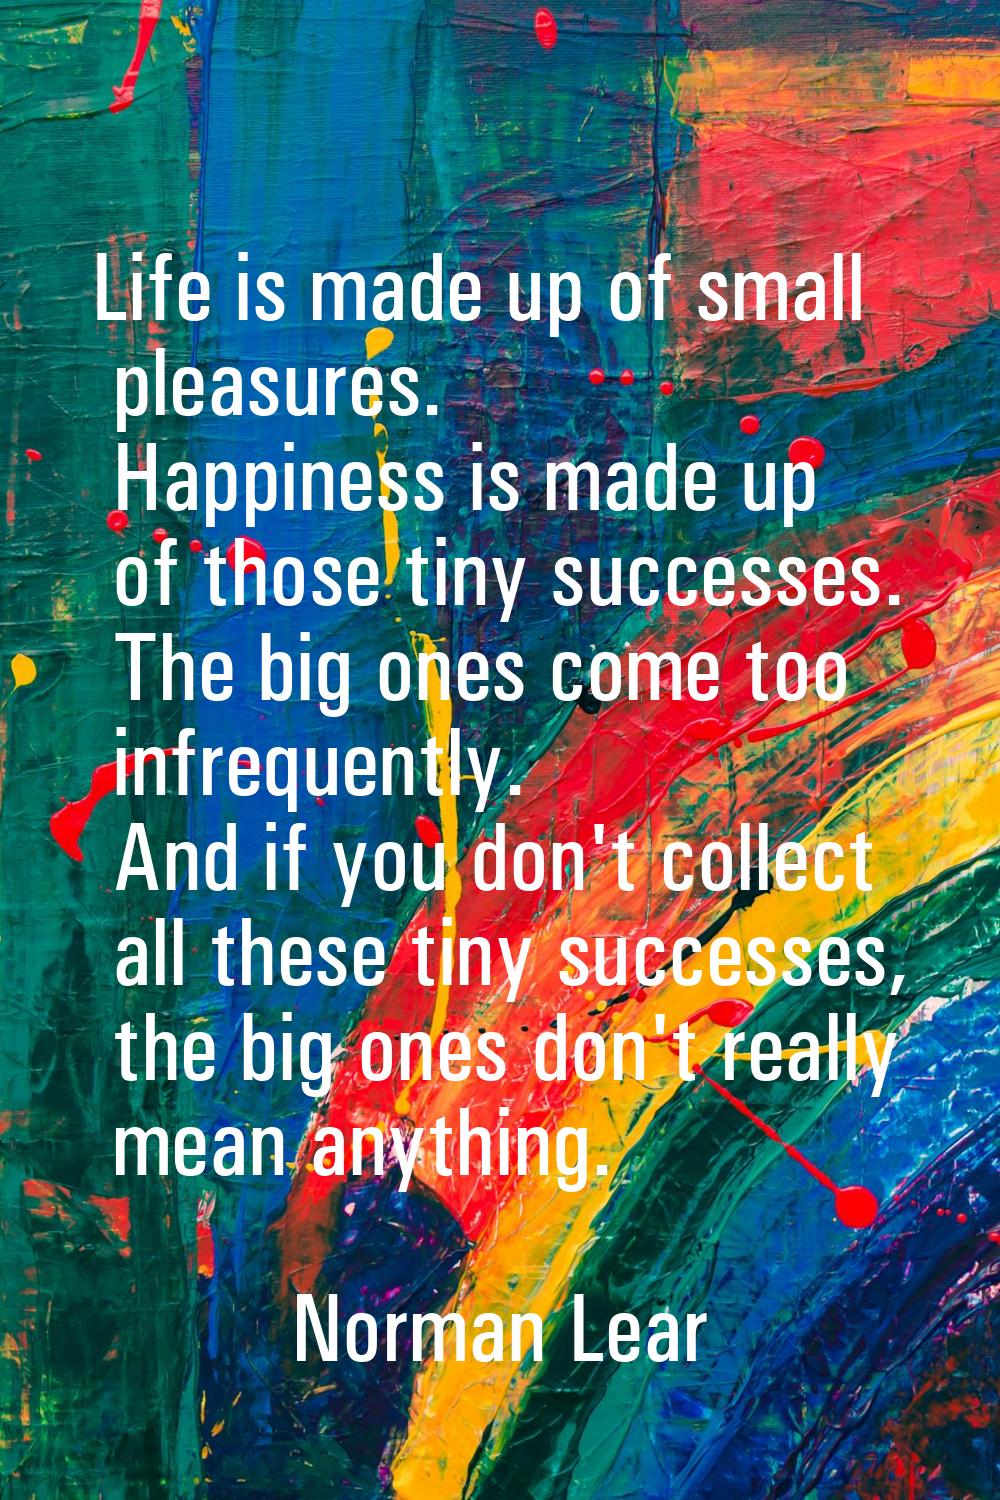 Life is made up of small pleasures. Happiness is made up of those tiny successes. The big ones come